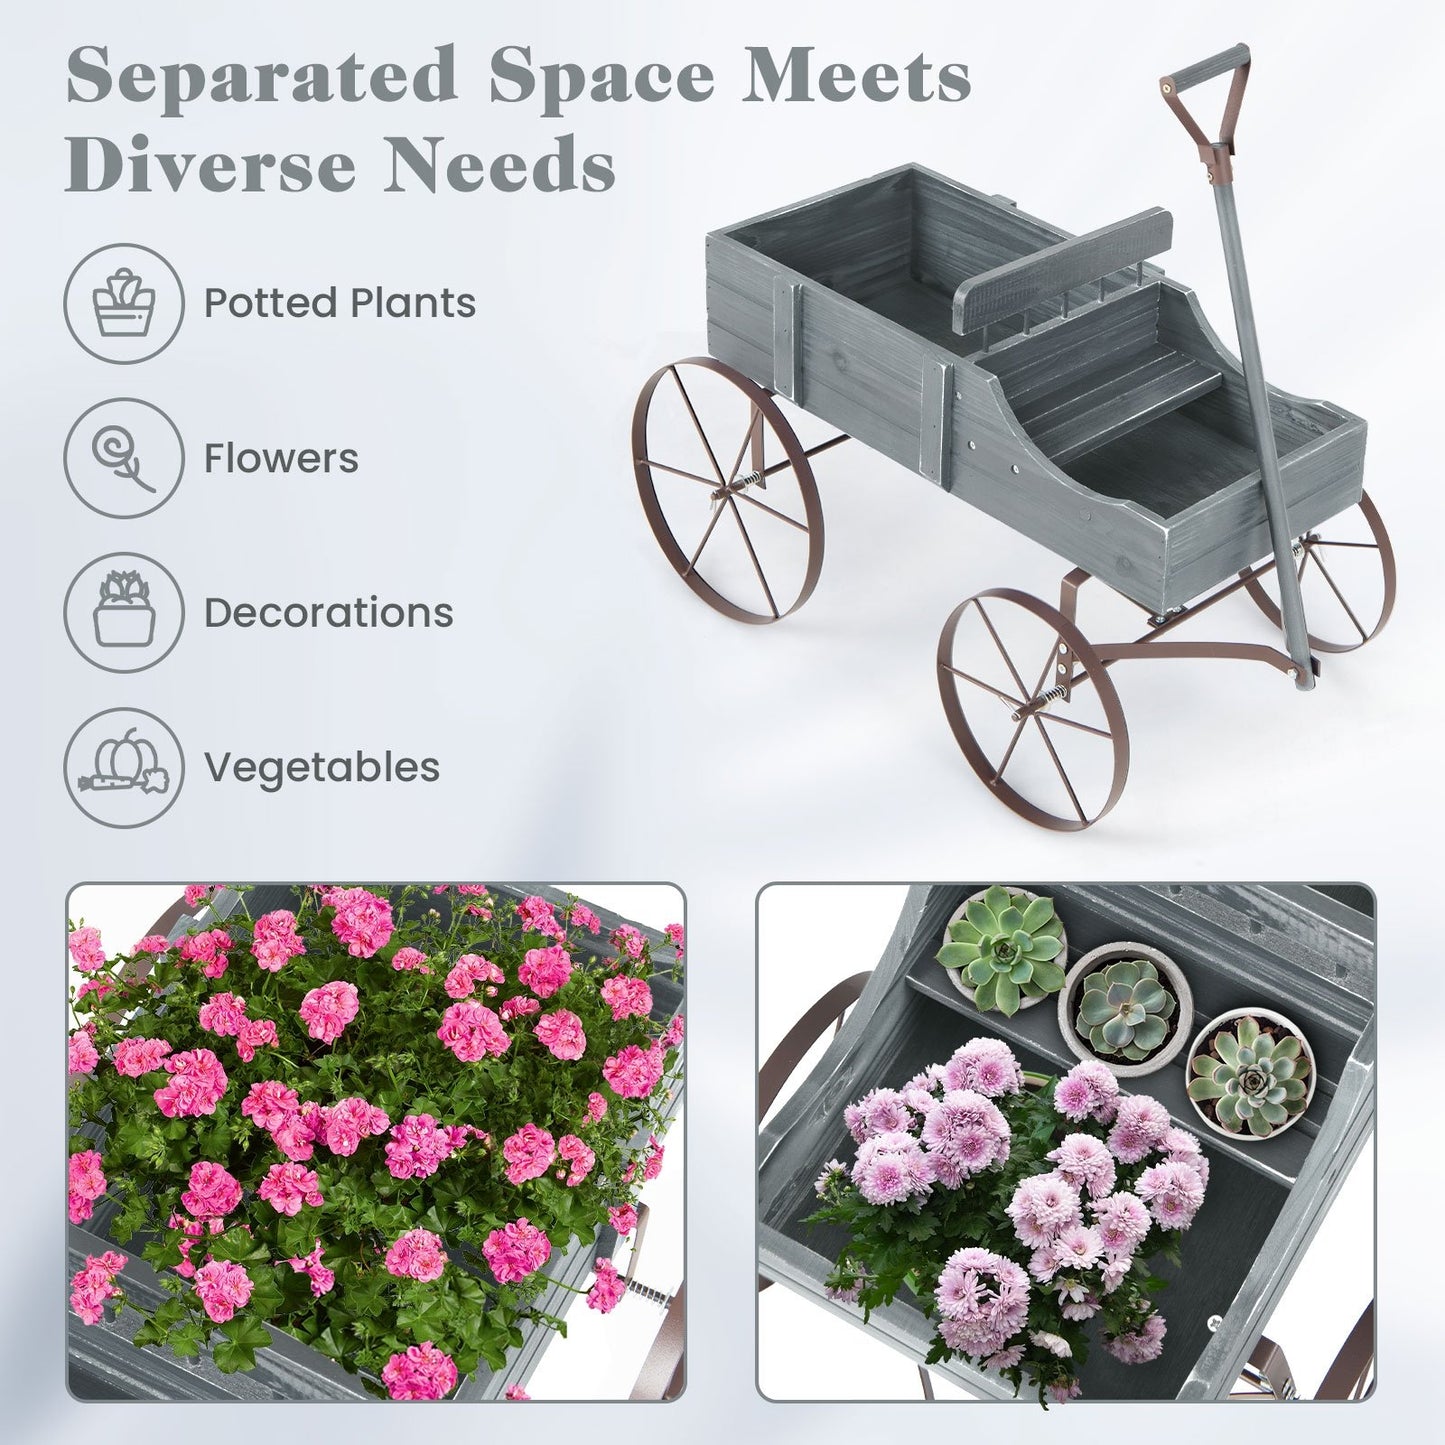 Wooden Wagon Plant Bed with Metal Wheels for Garden Yard Patio, Gray